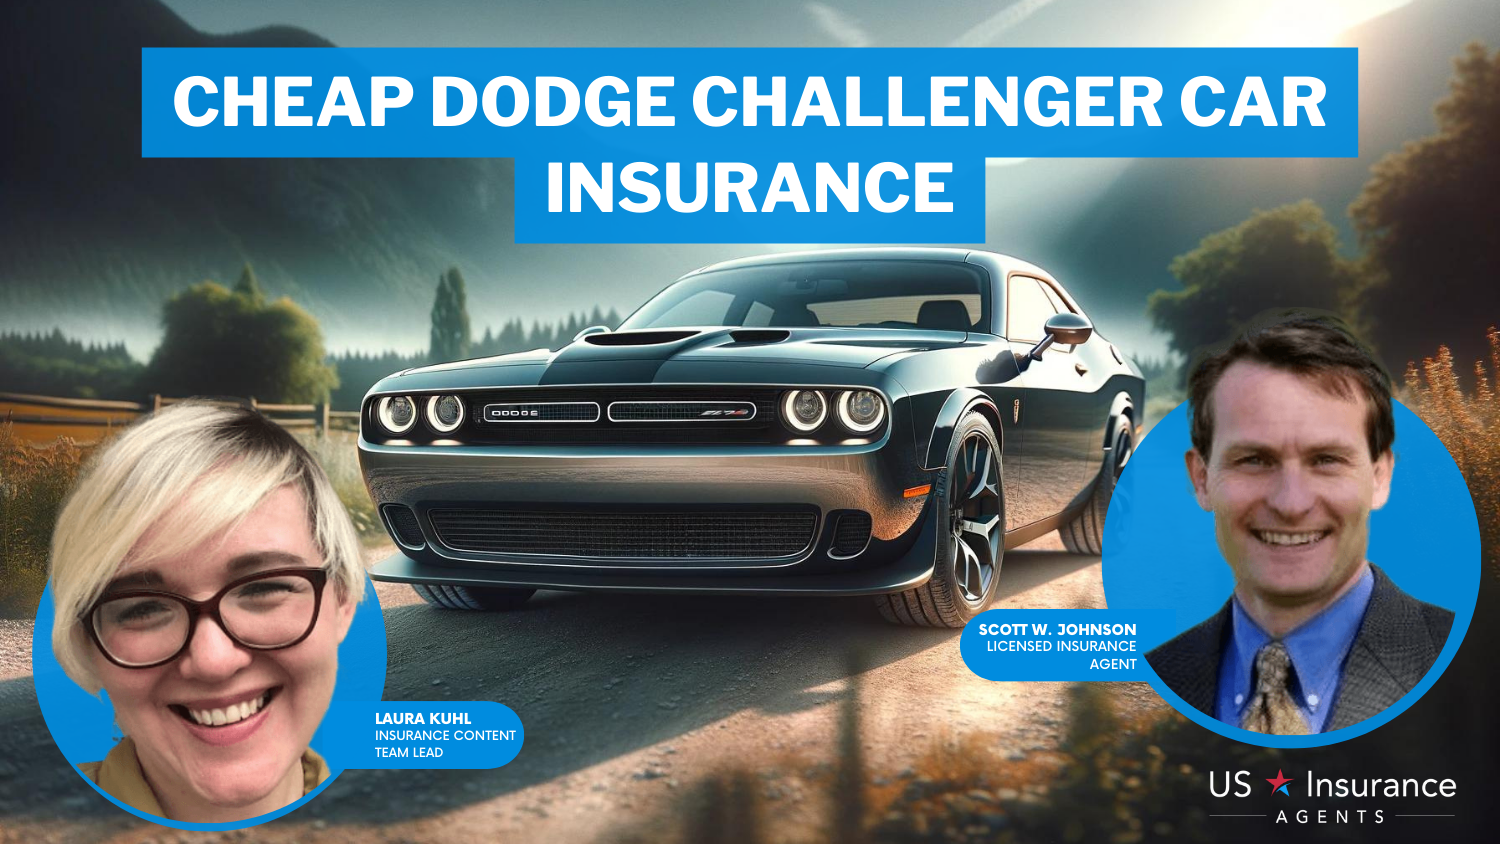 Cheap Dodge Challenger Car Insurance: Progressive, Nationwide, and Travelers